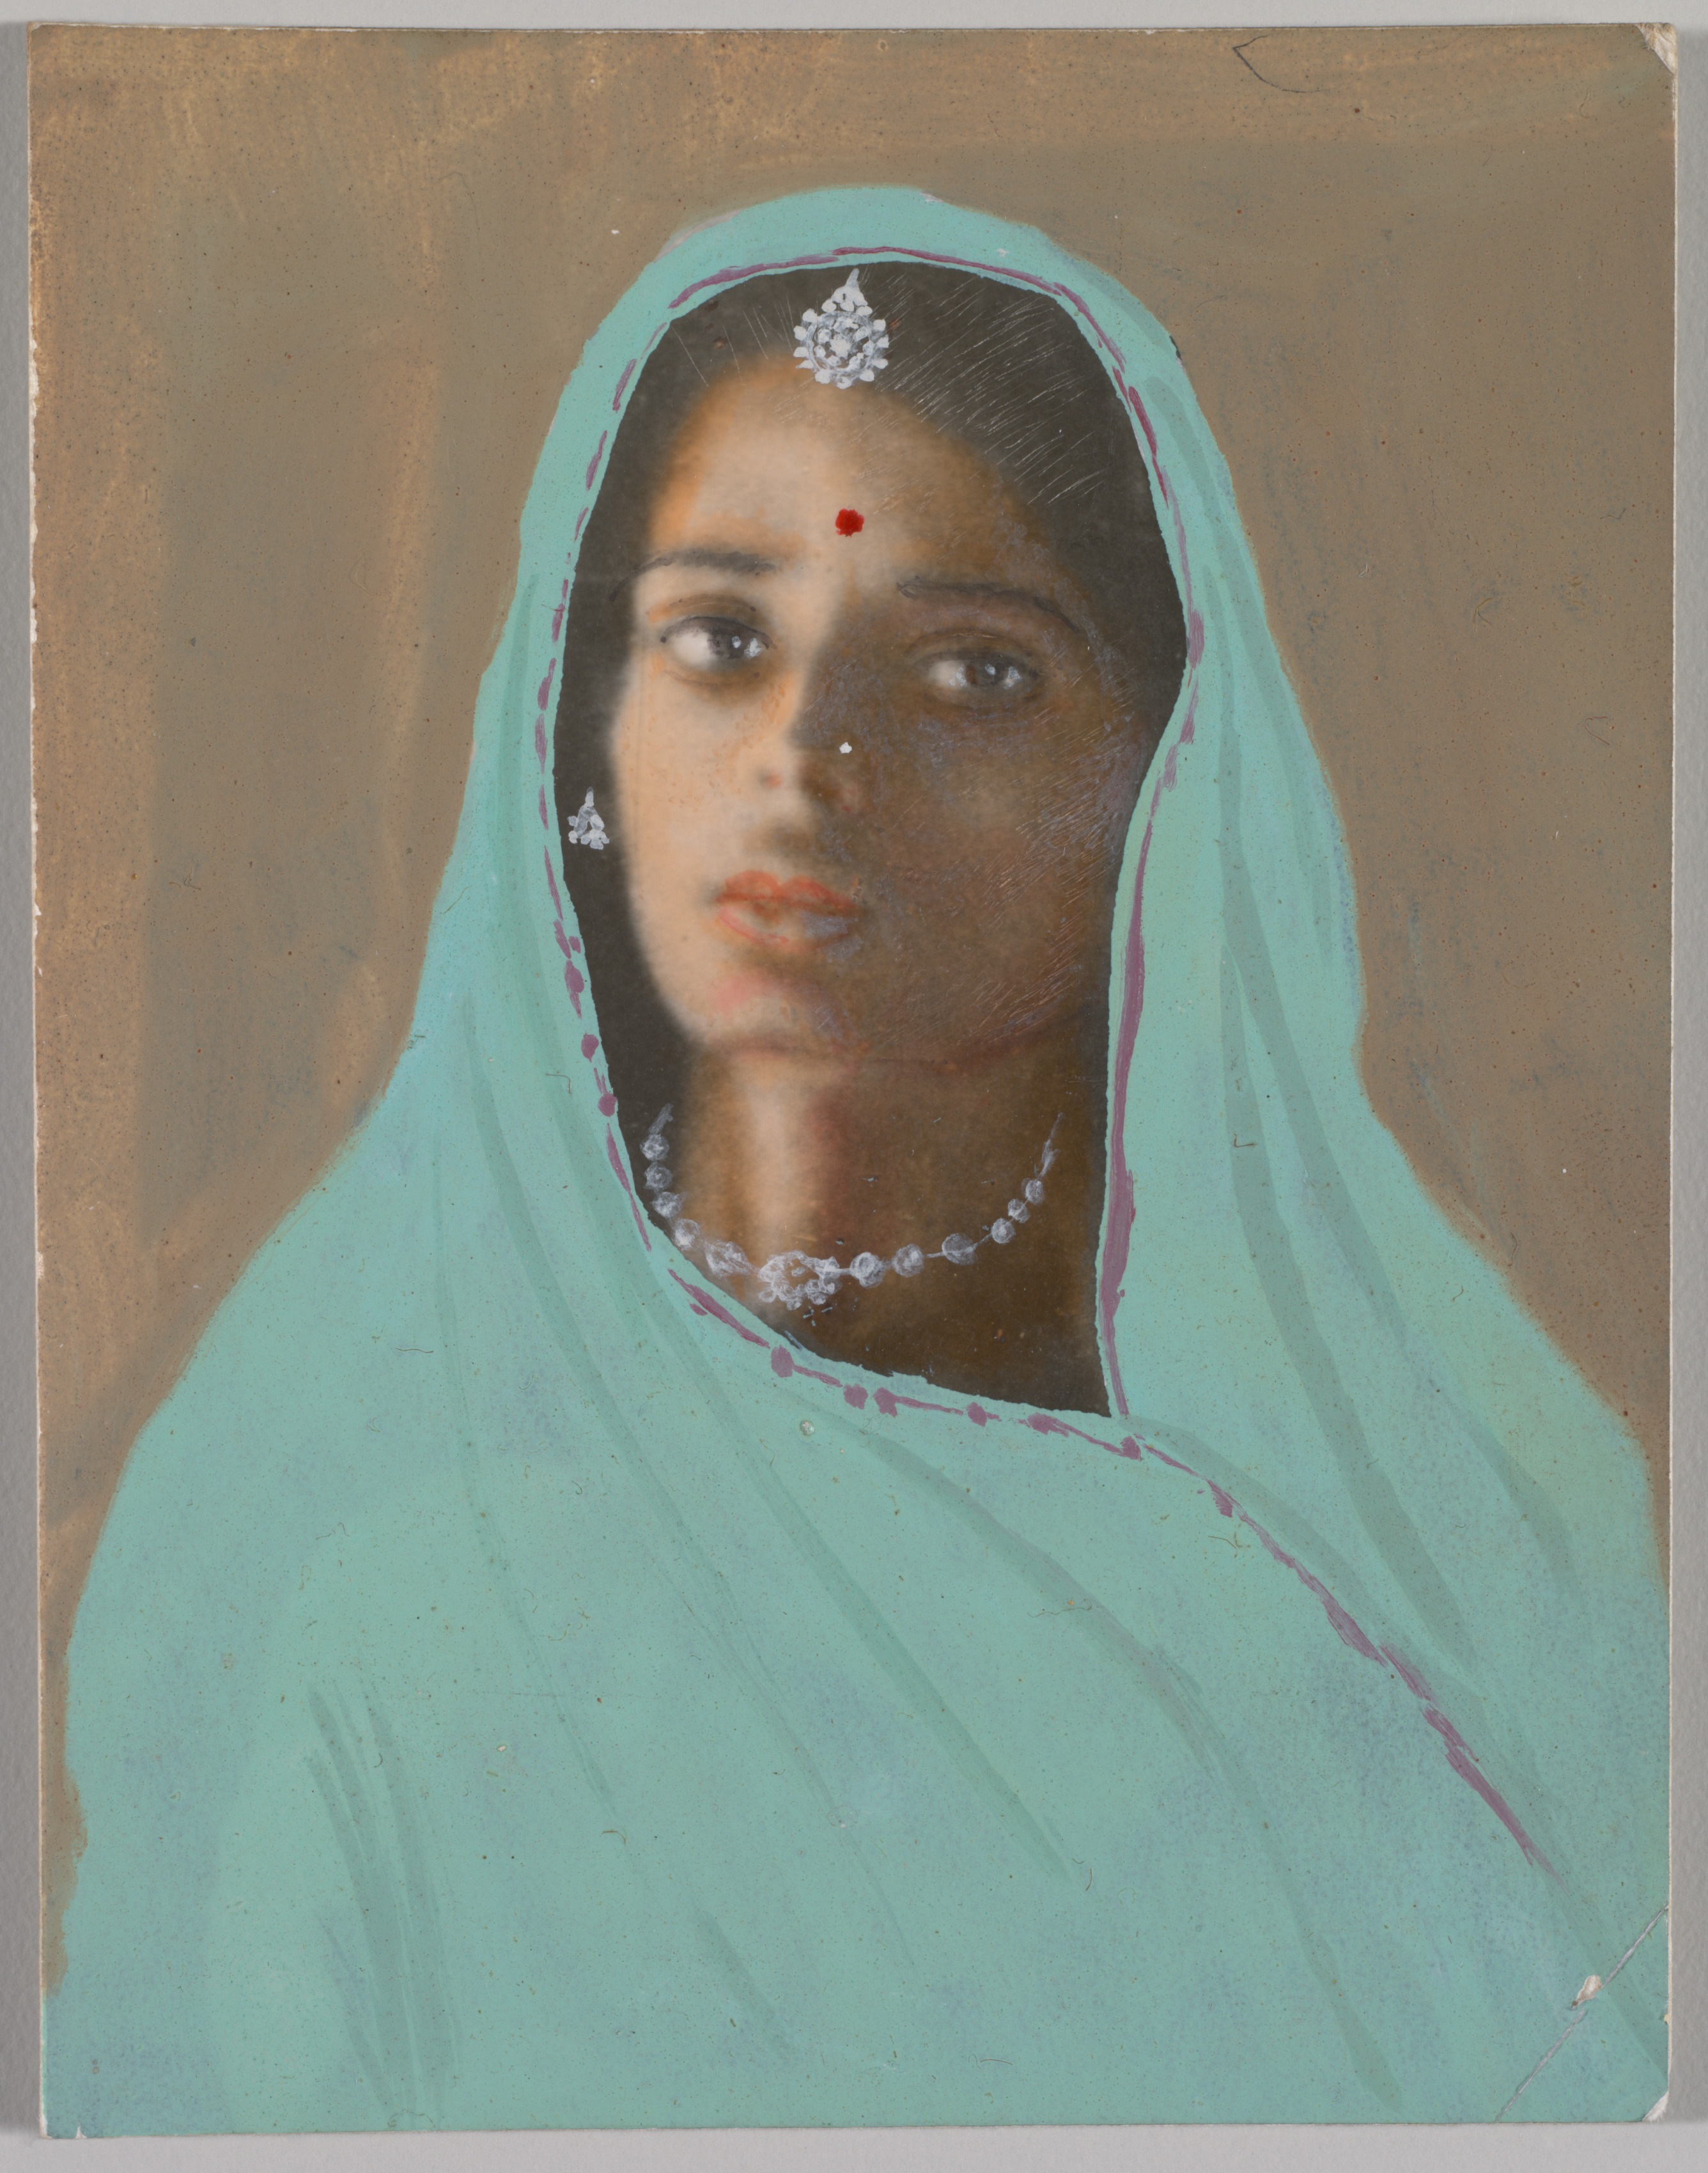 Untitled (Portrait of a Woman in Blue Sari and Veil)